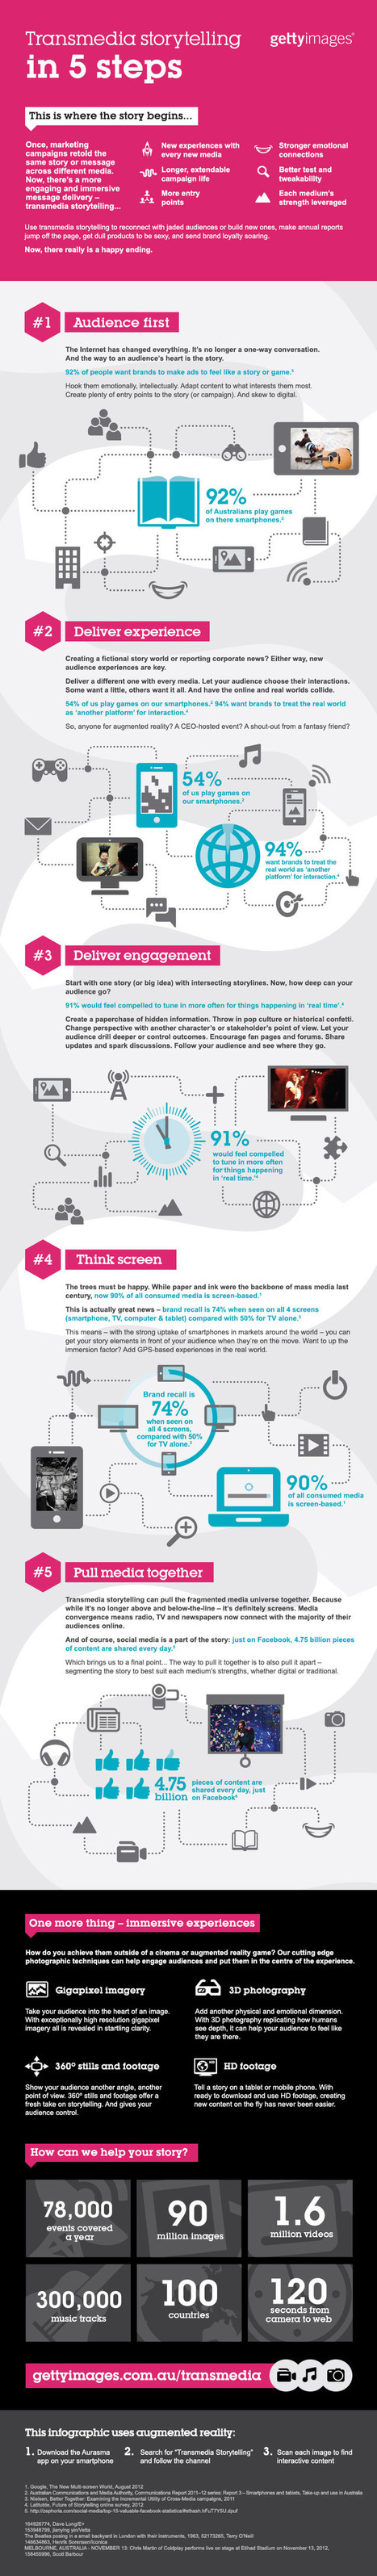 Infographic: The science behind transmedia storytelling and why you need to be across it now | MarketingHits | Scoop.it